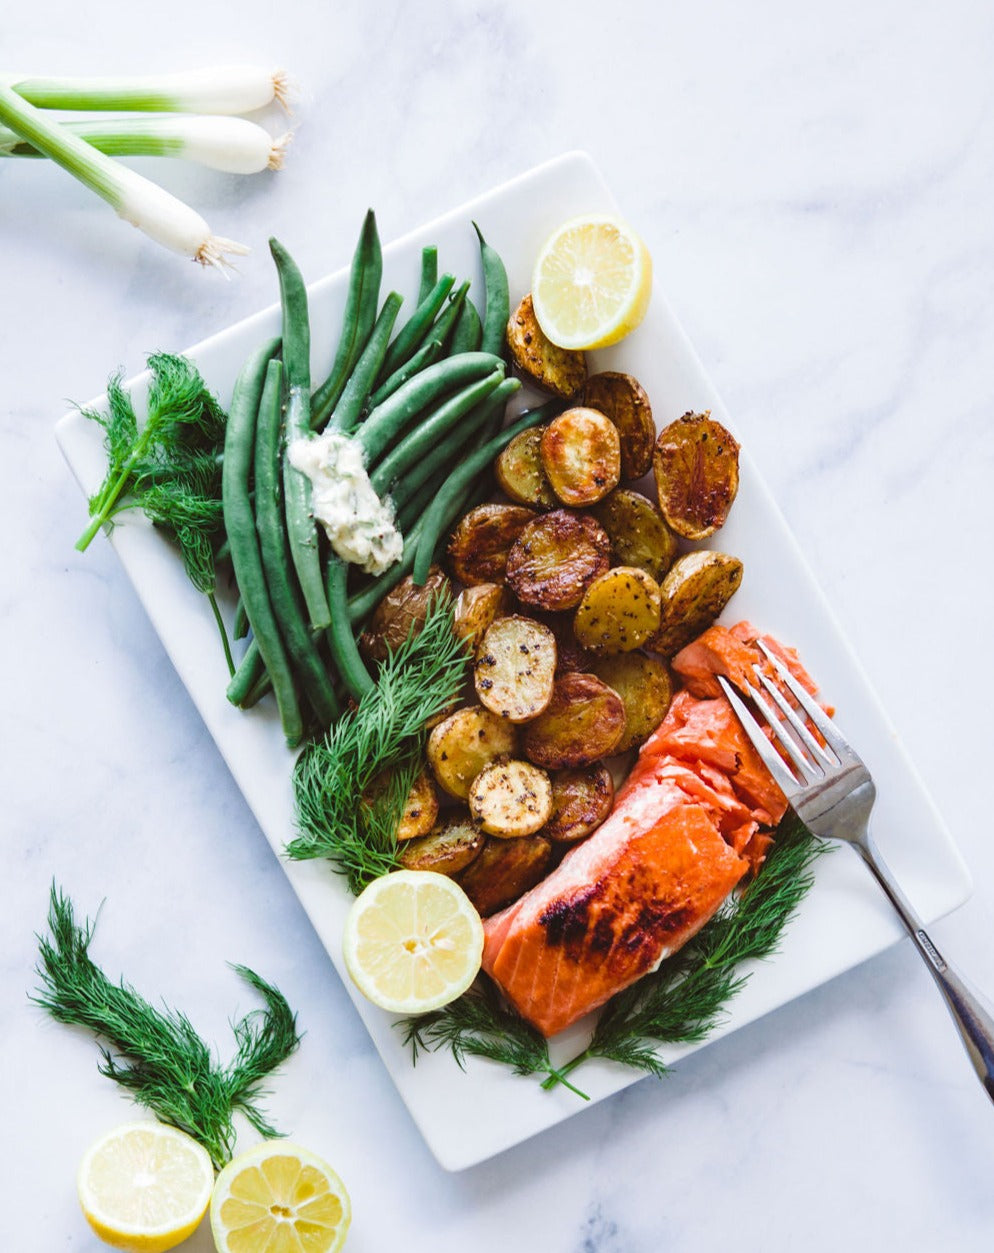 Cooked Copper River Salmon with Roasted lemon Veggies